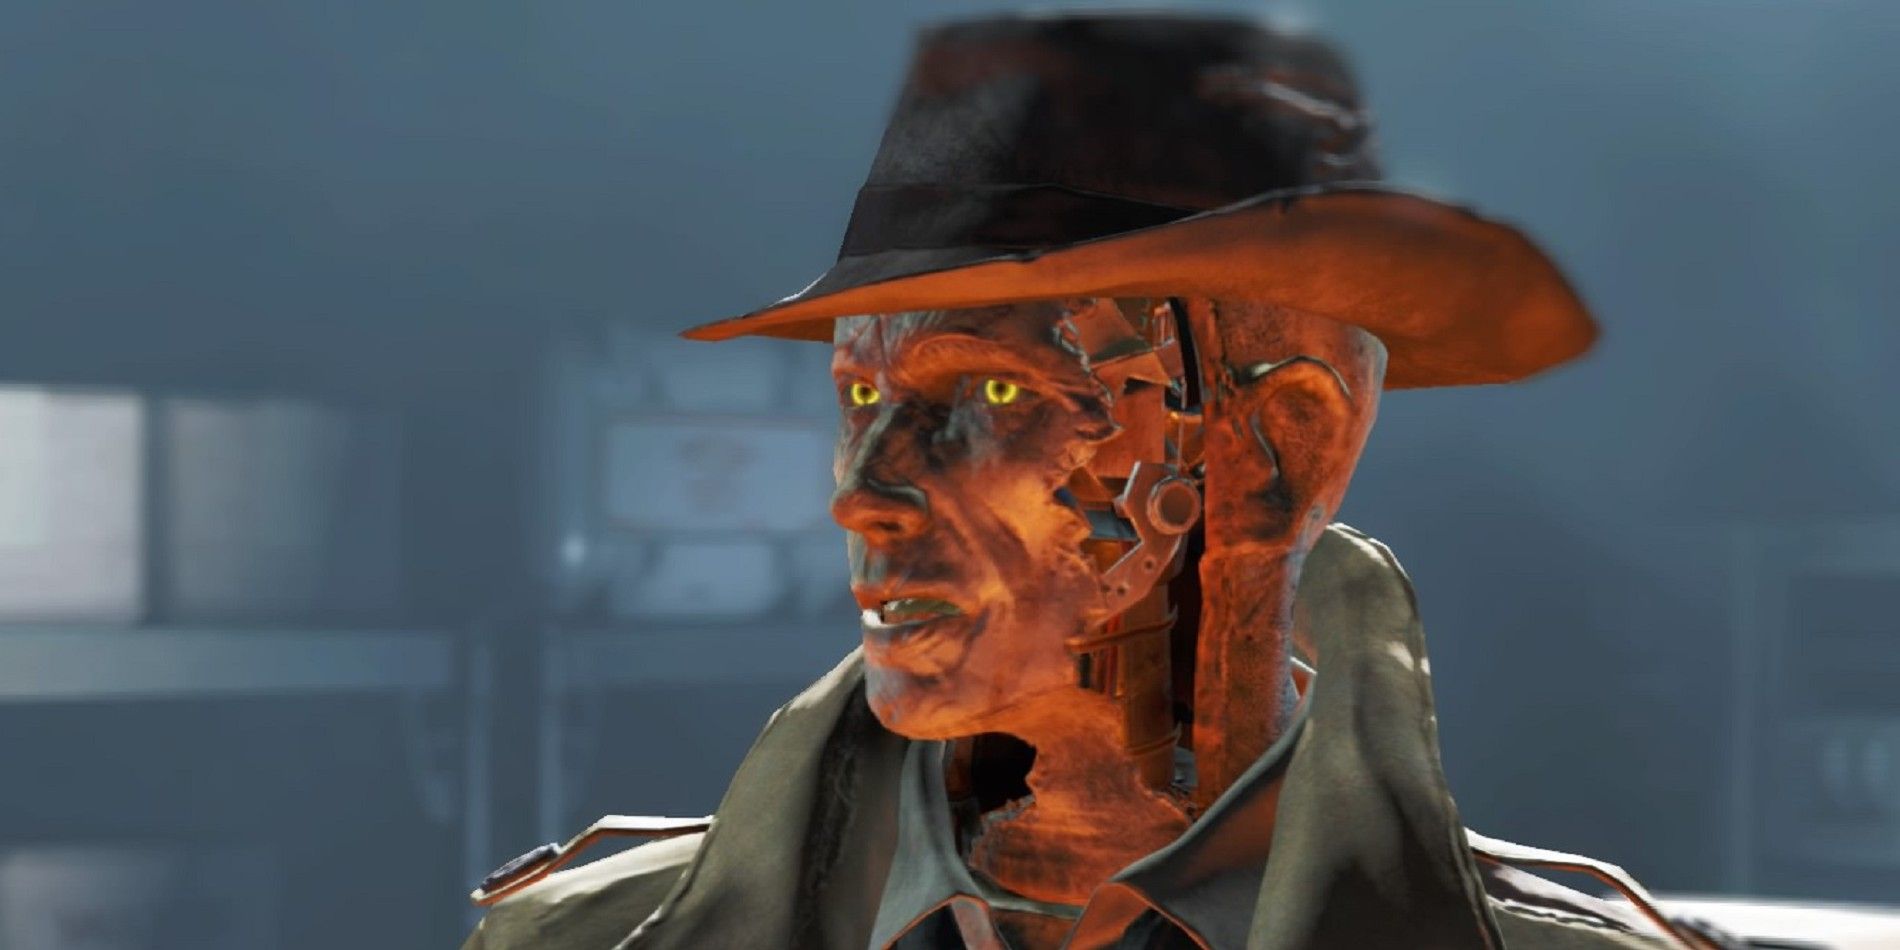 Nick Valentine in Fallout 4.